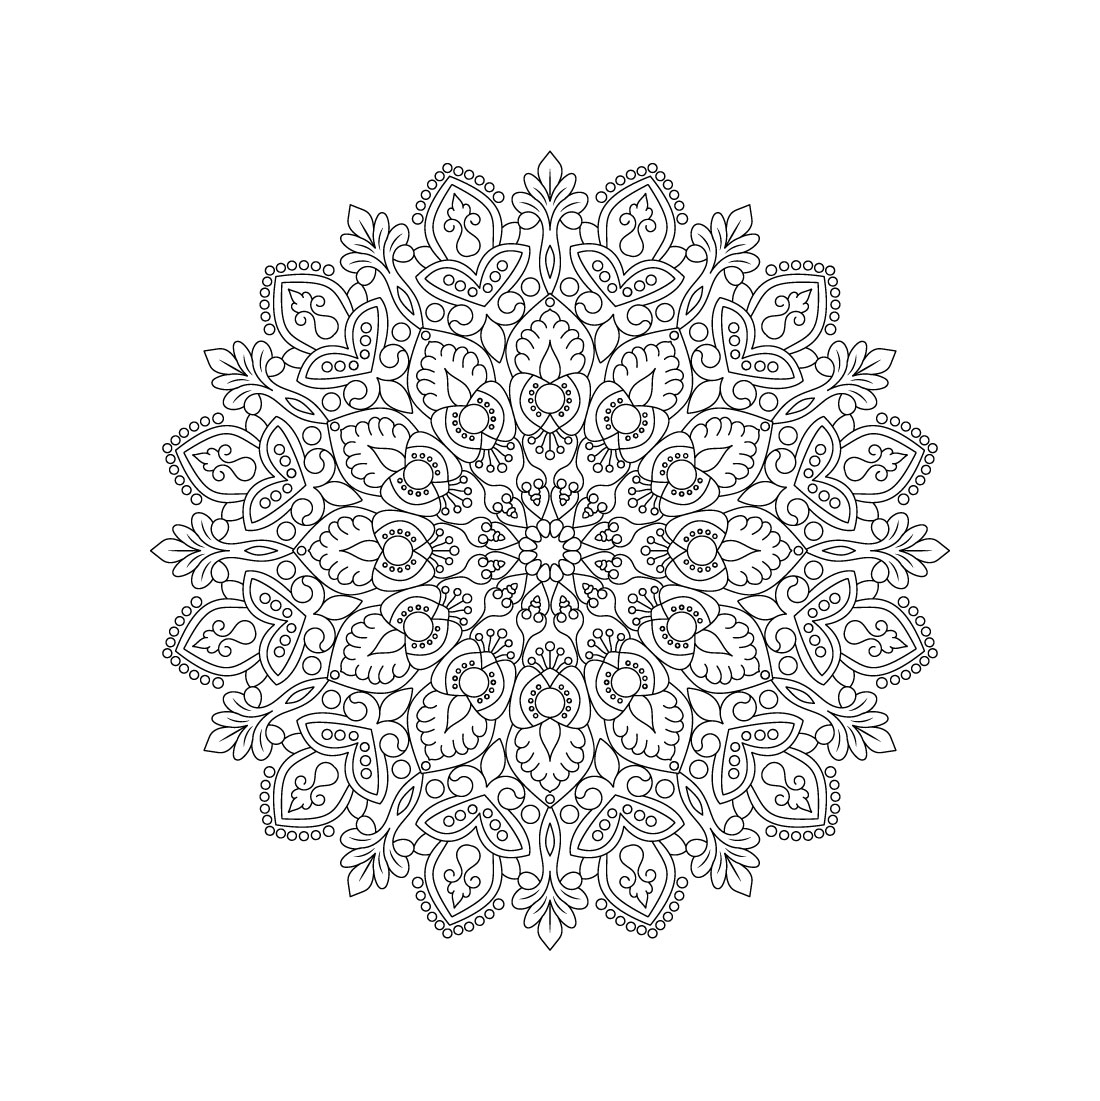 bundle of 10 tranquility mandala coloring book pages 09 769